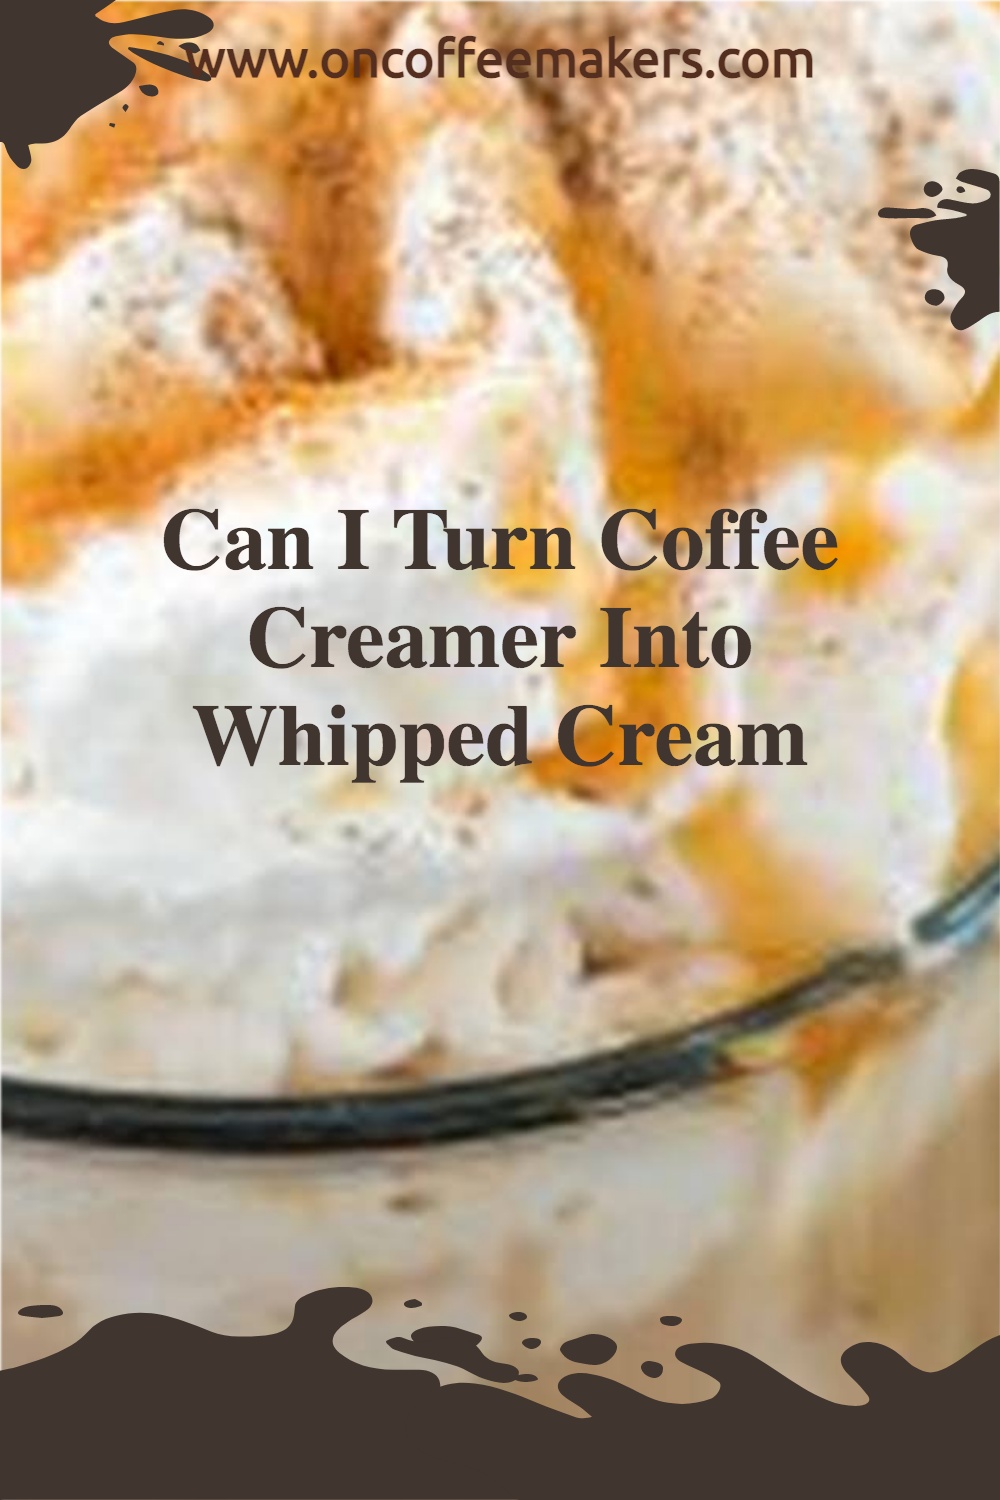 Can I Turn Coffee Creamer into Whipped Cream? 